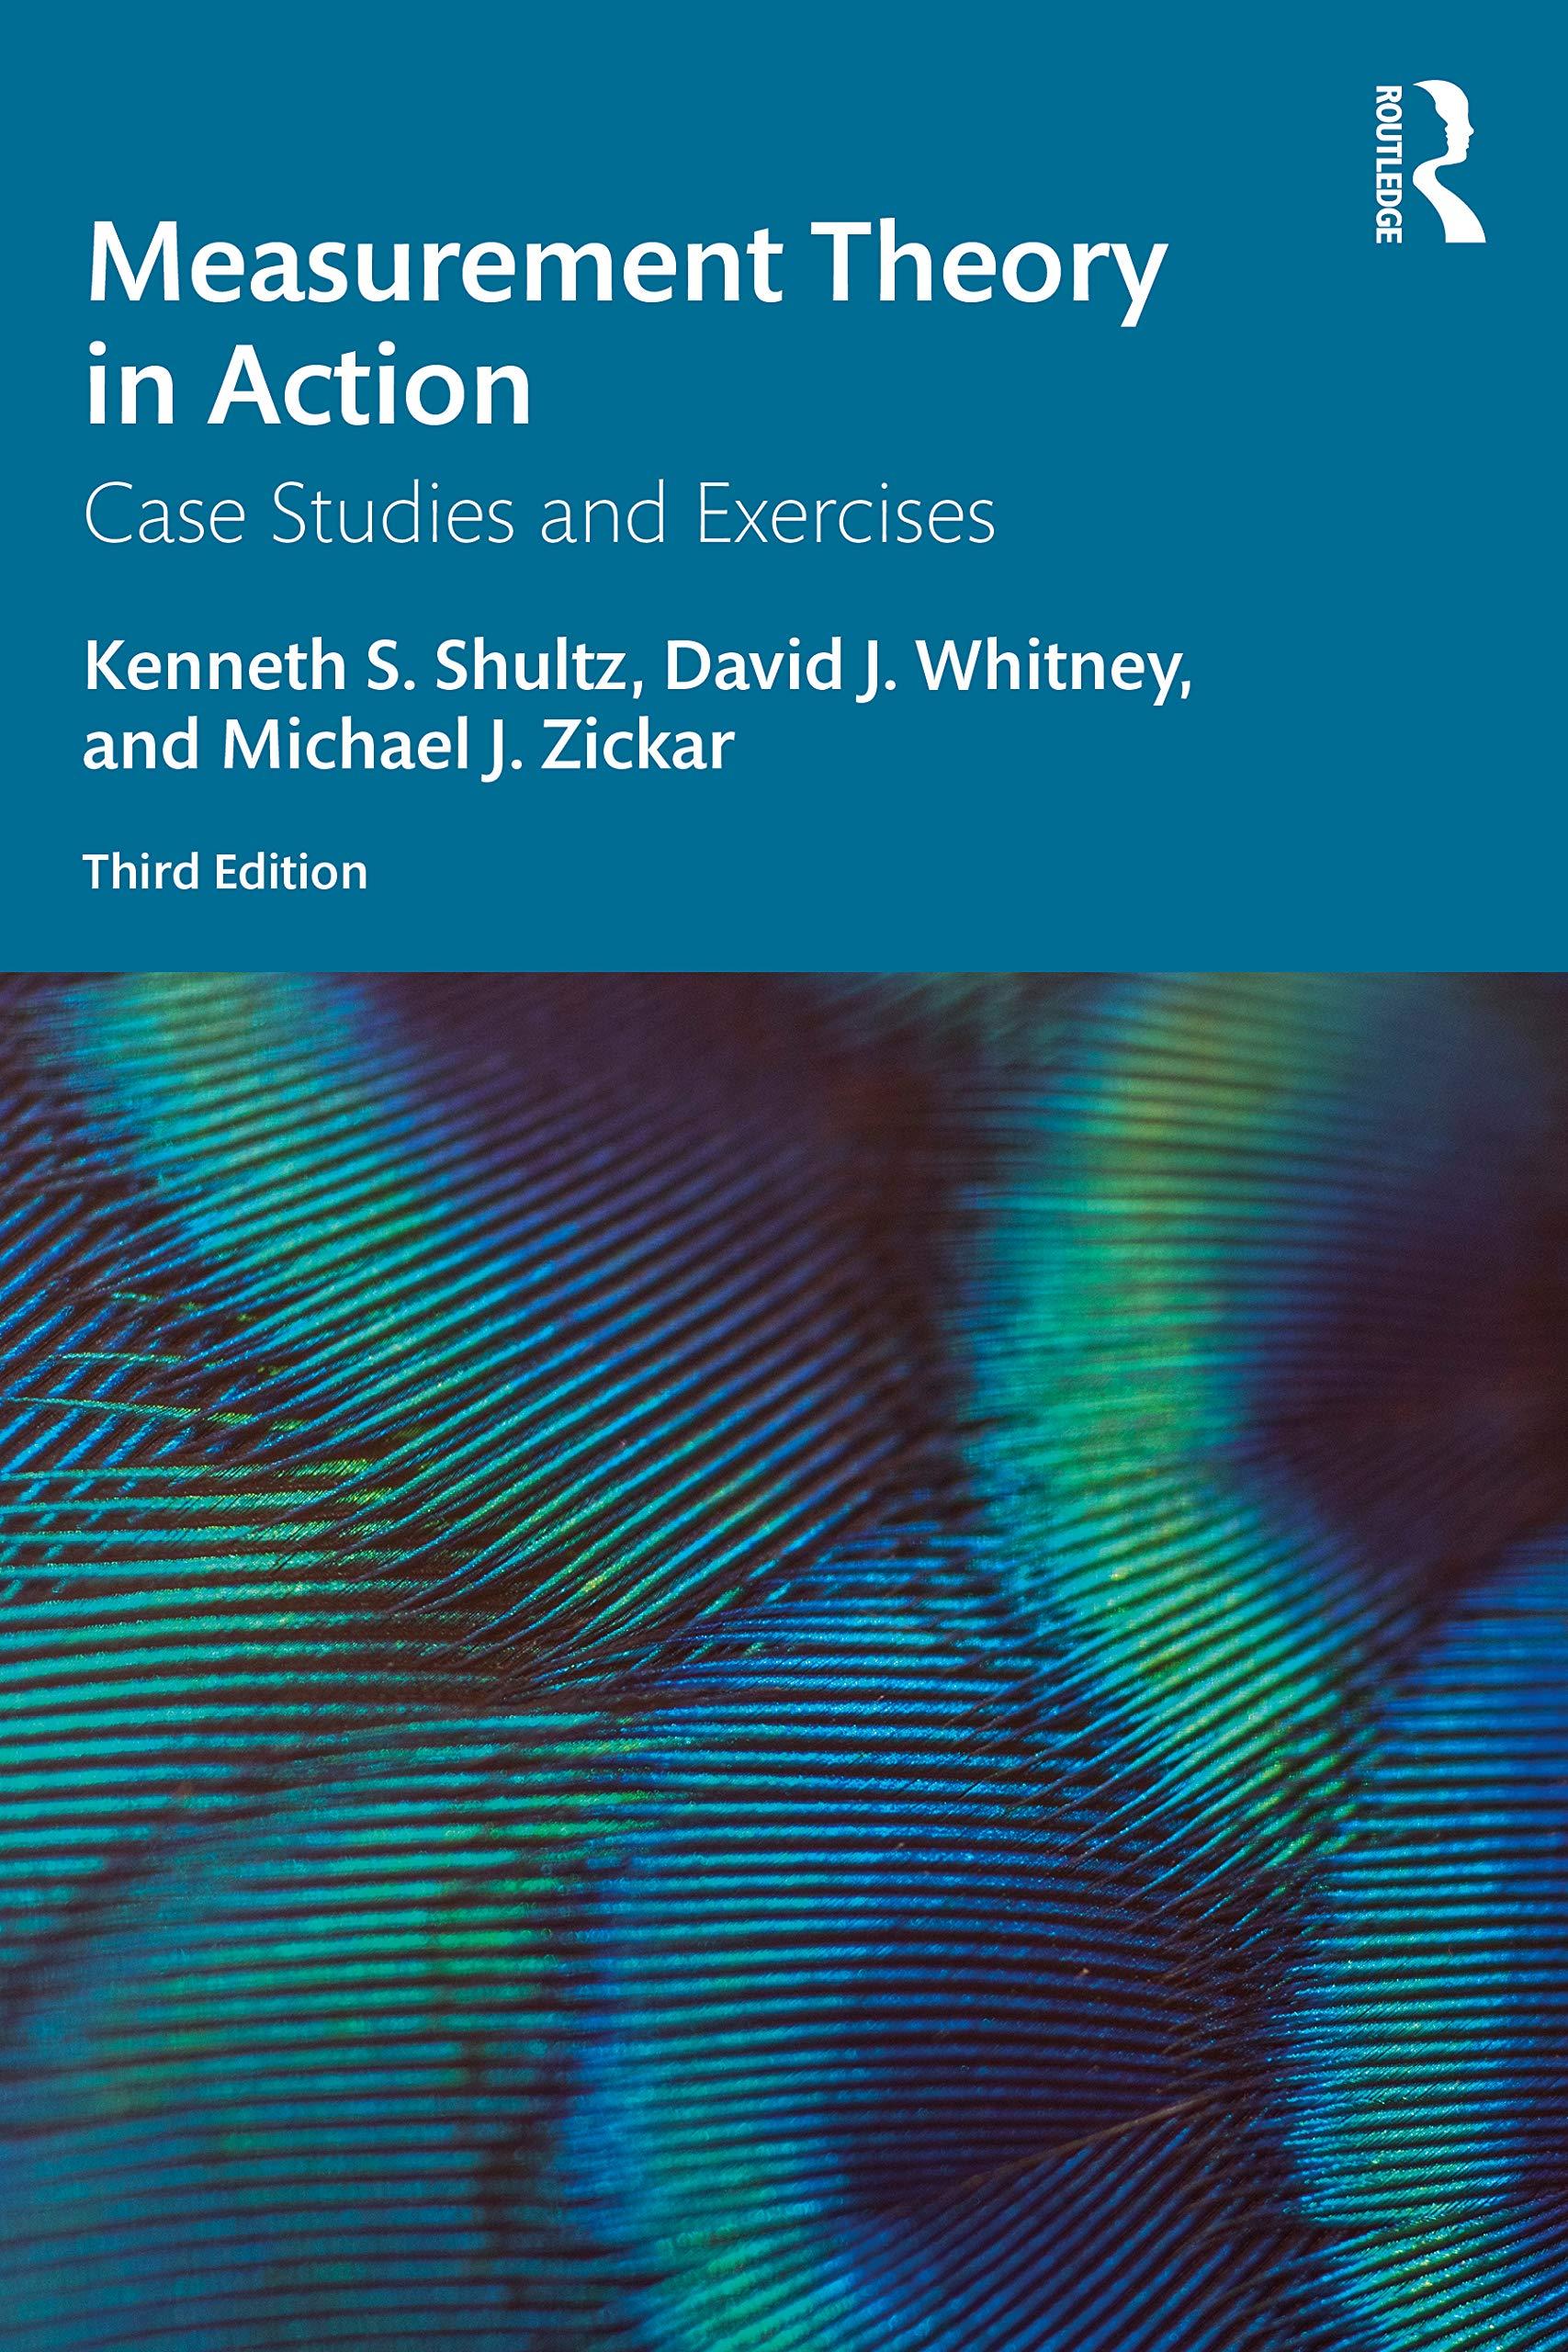 measurement theory in action 3rd edition kenneth s shultz, david whitney, michael j zickar 0367192187,